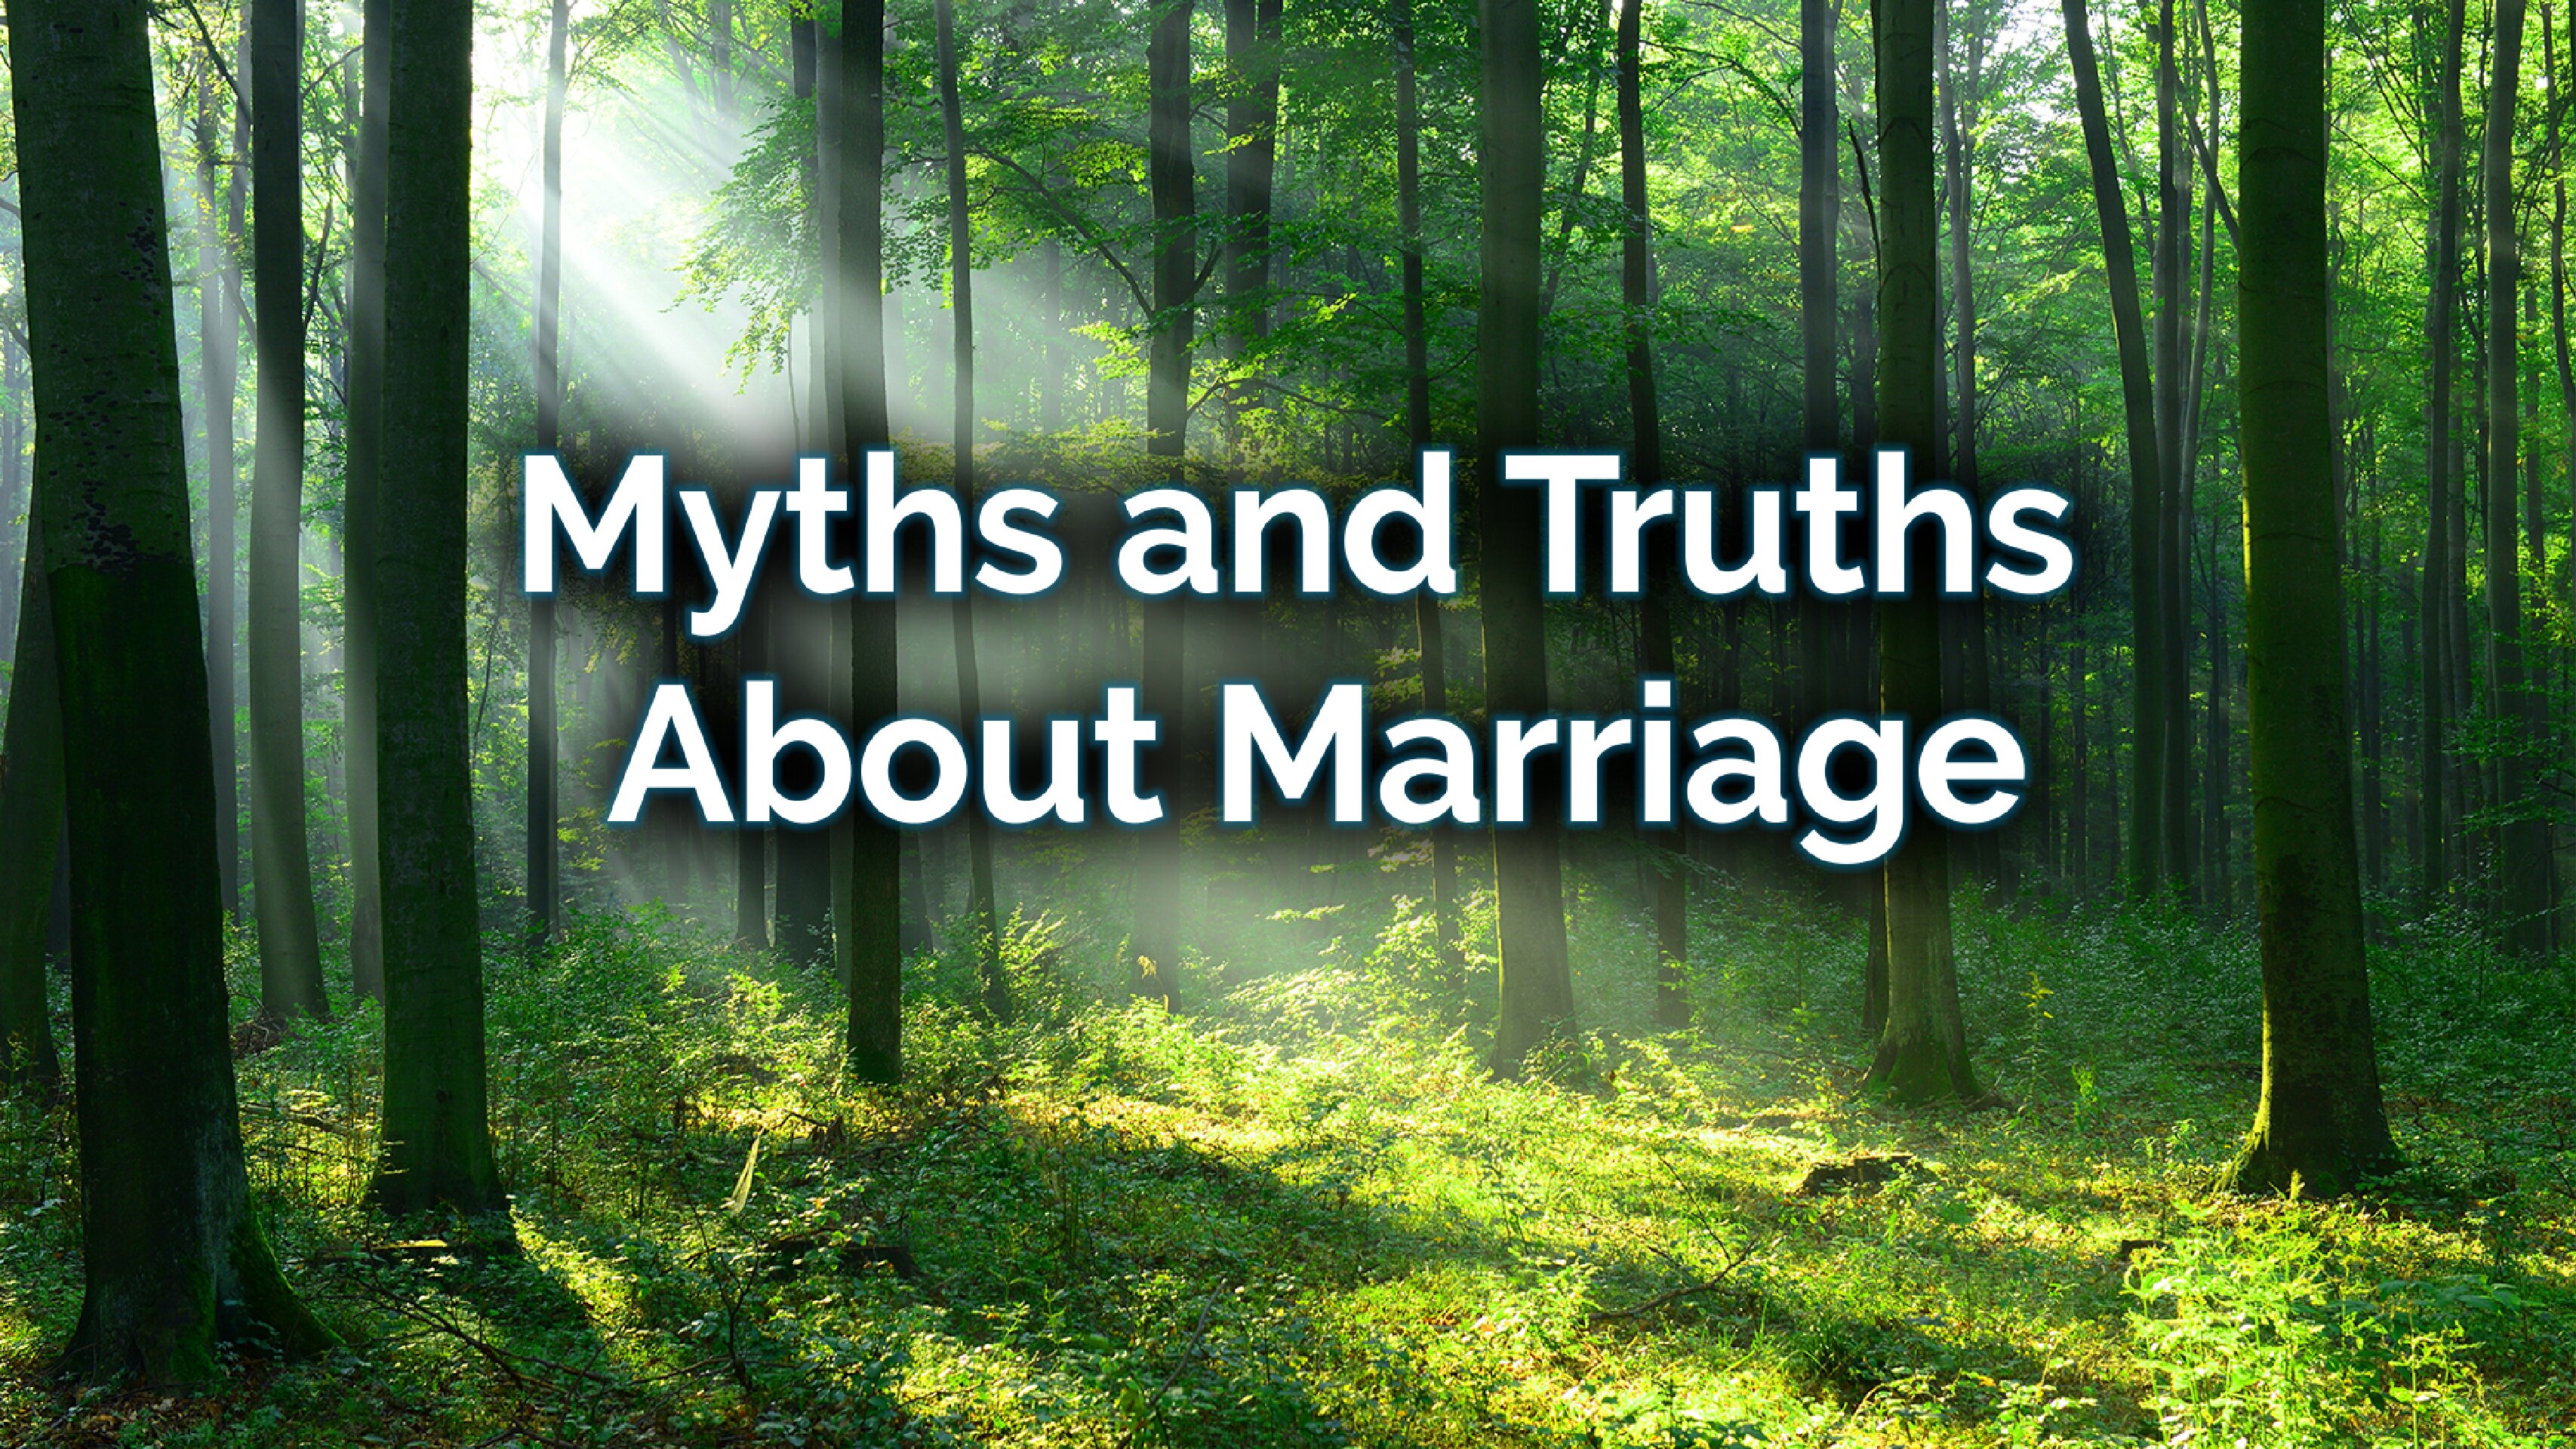 Myths and Truths About Marriage